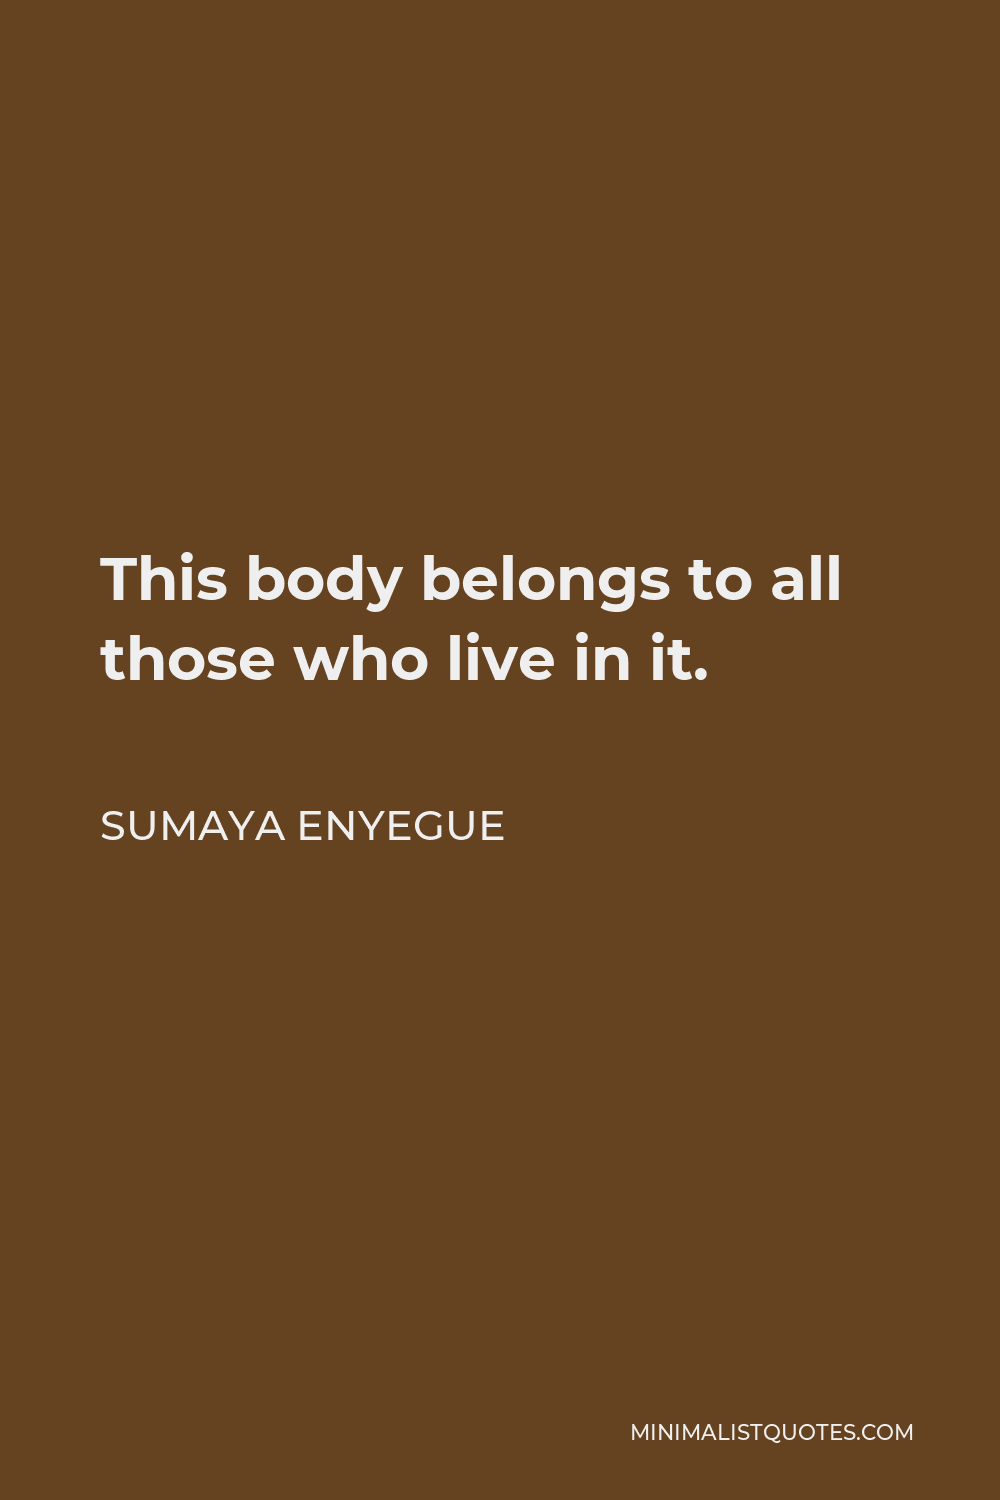 Sumaya Enyegue Quote - This body belongs to all those who live in it.